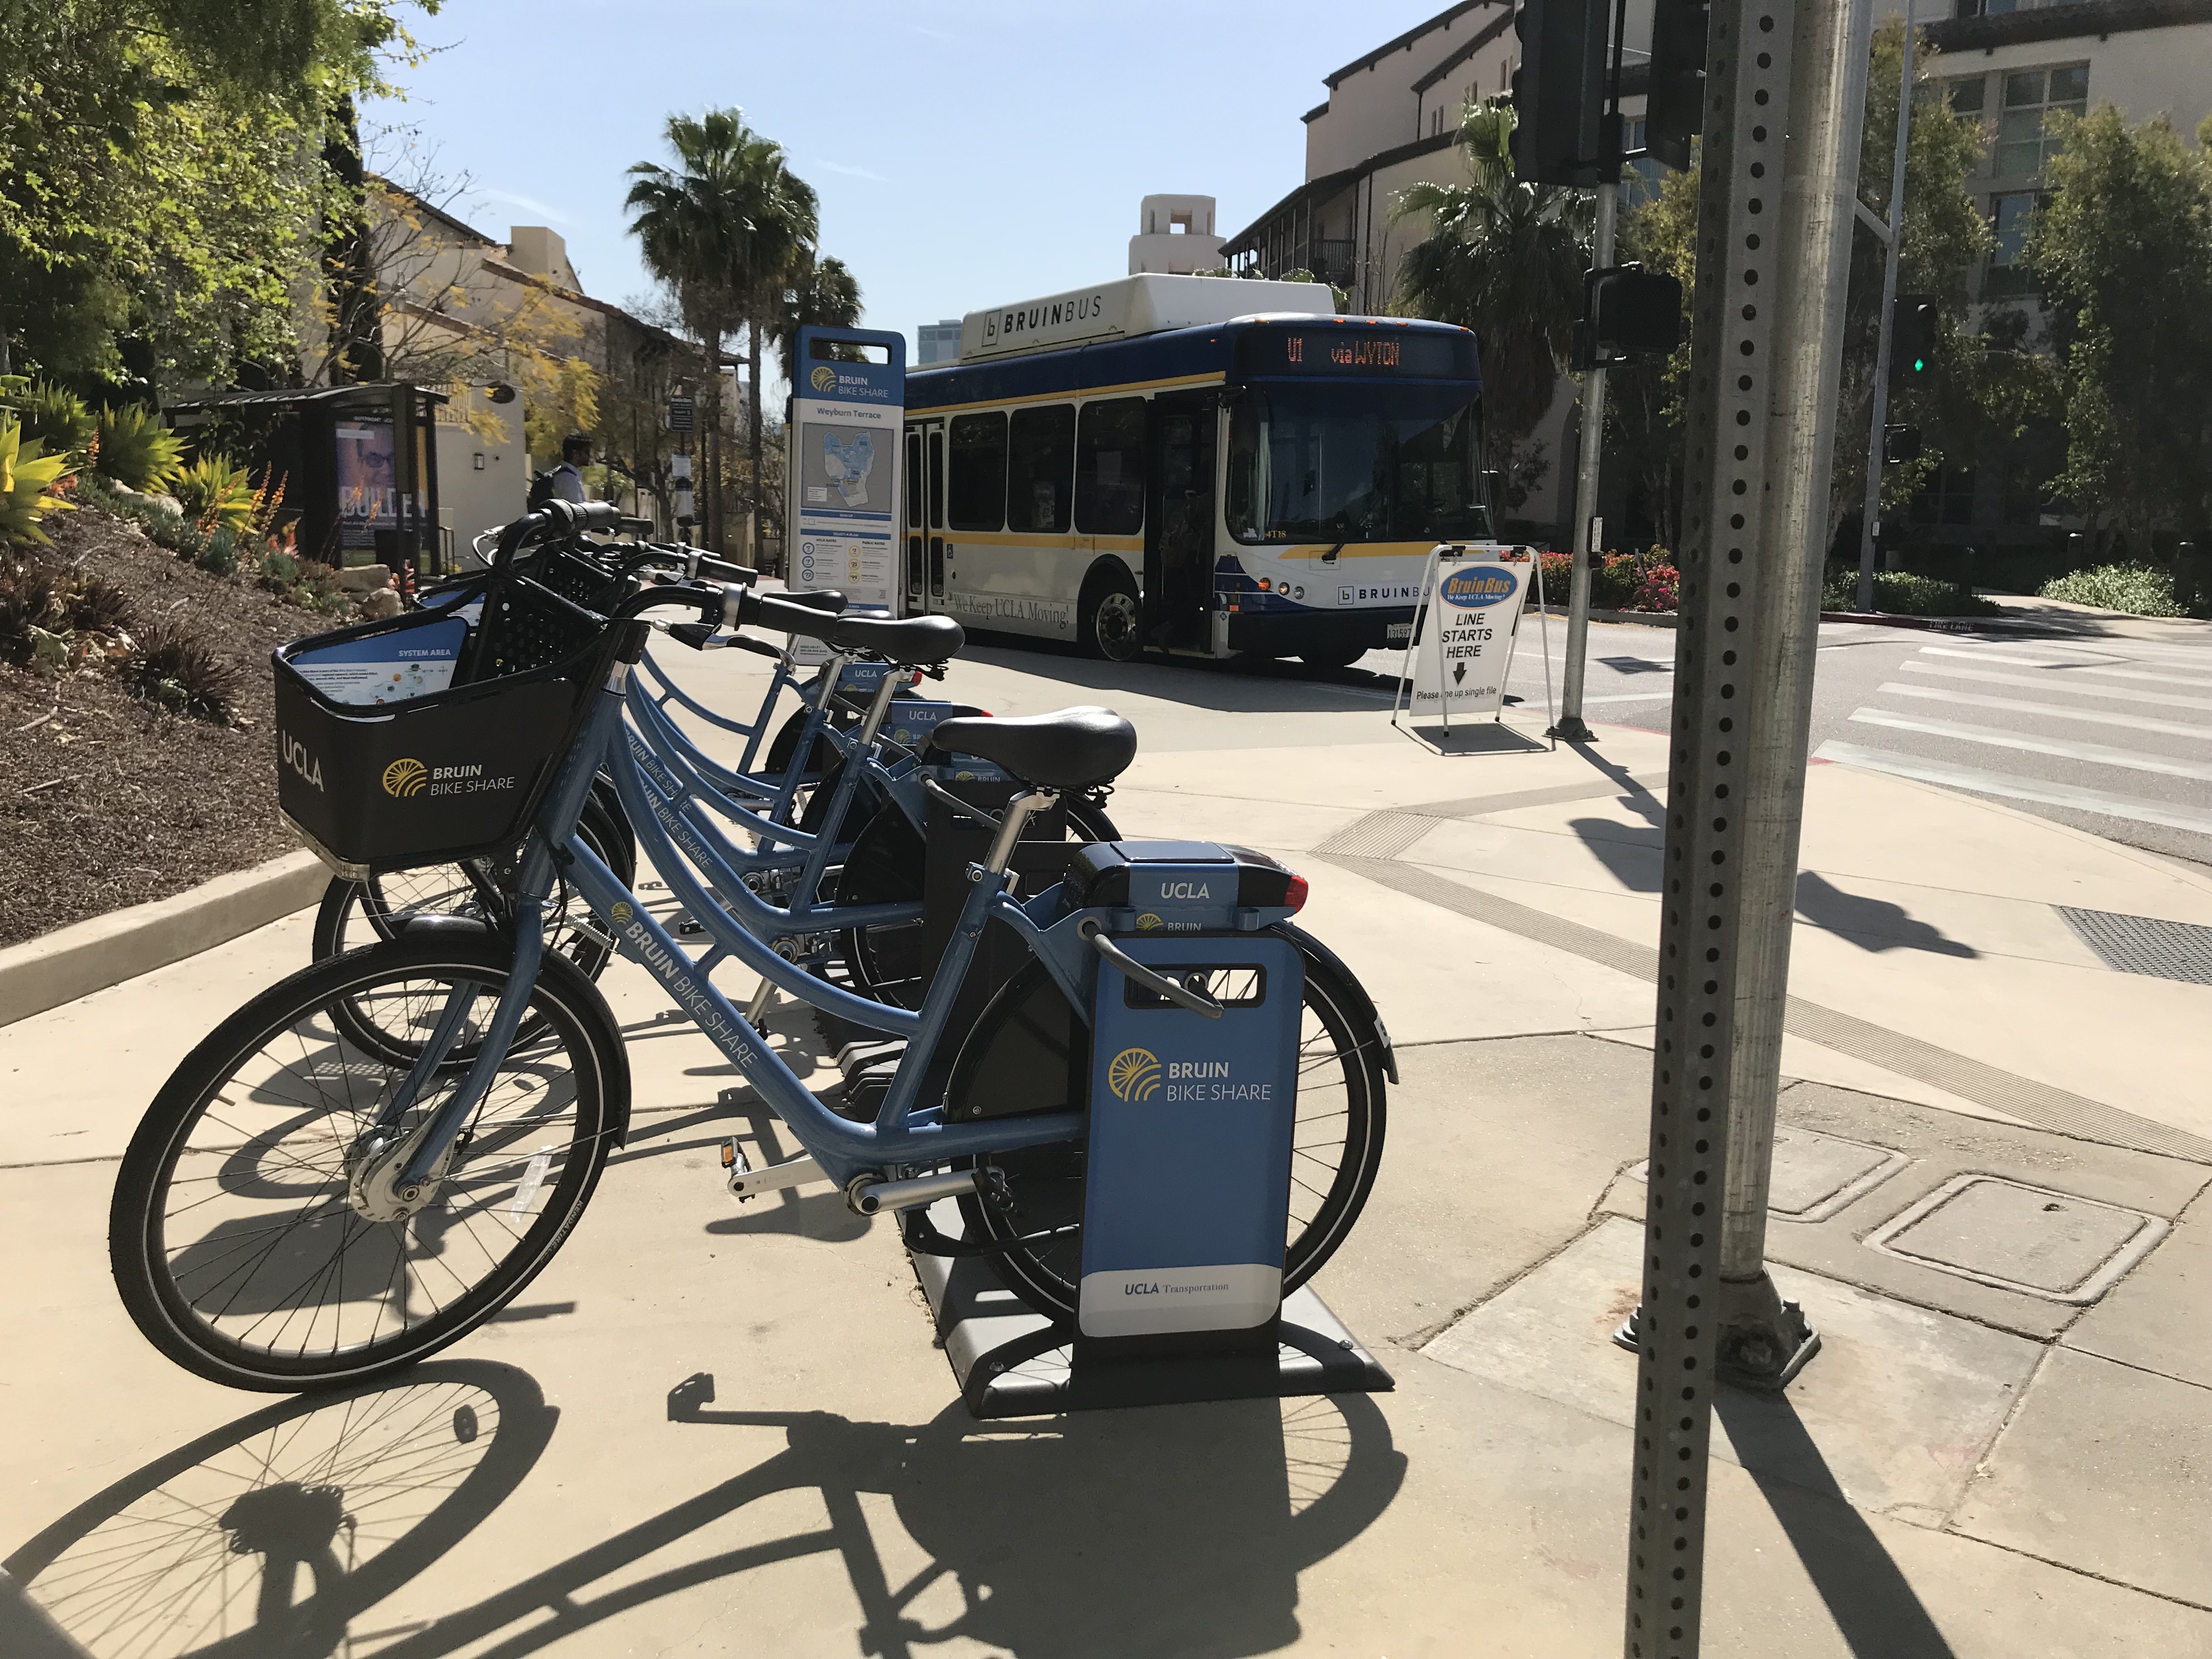 Bruin bikes and bus